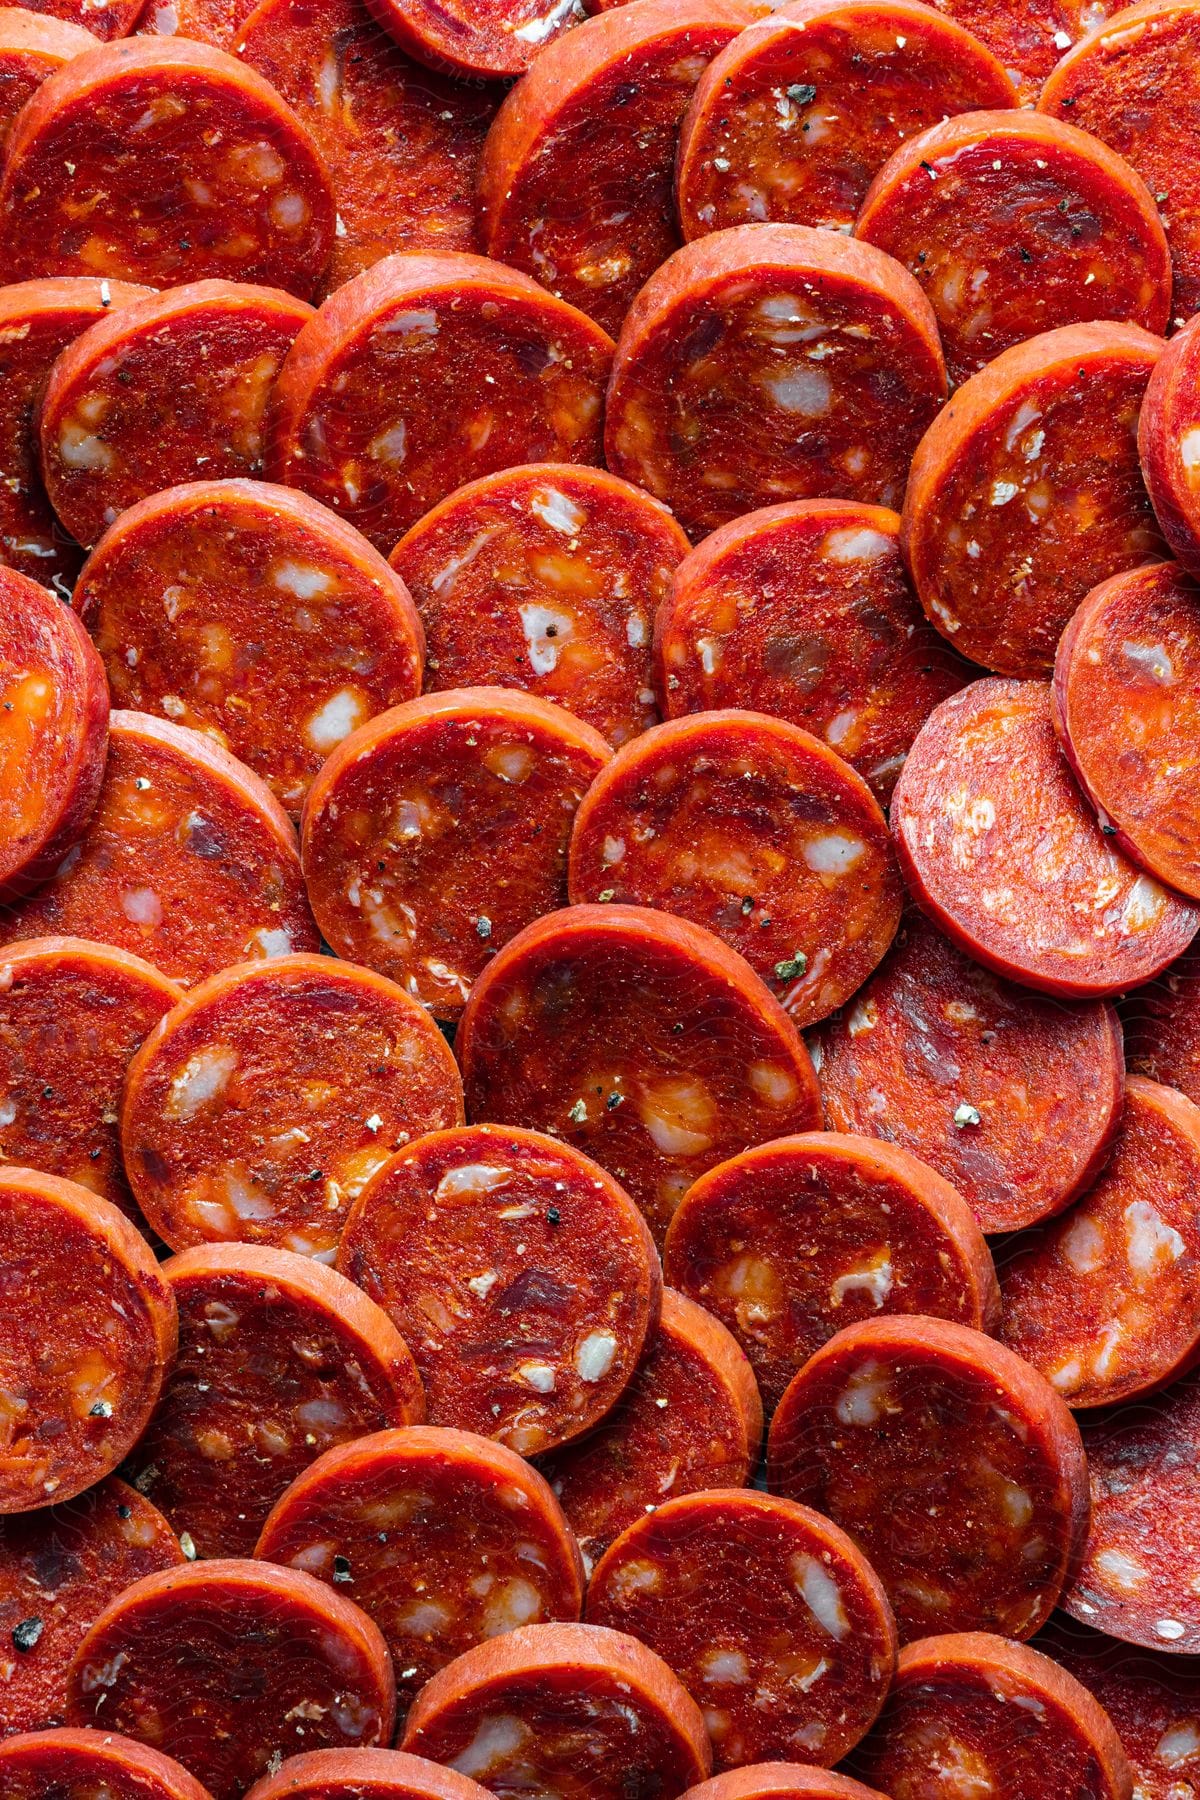 A series of pepperoni slices are stacked on top of each other.